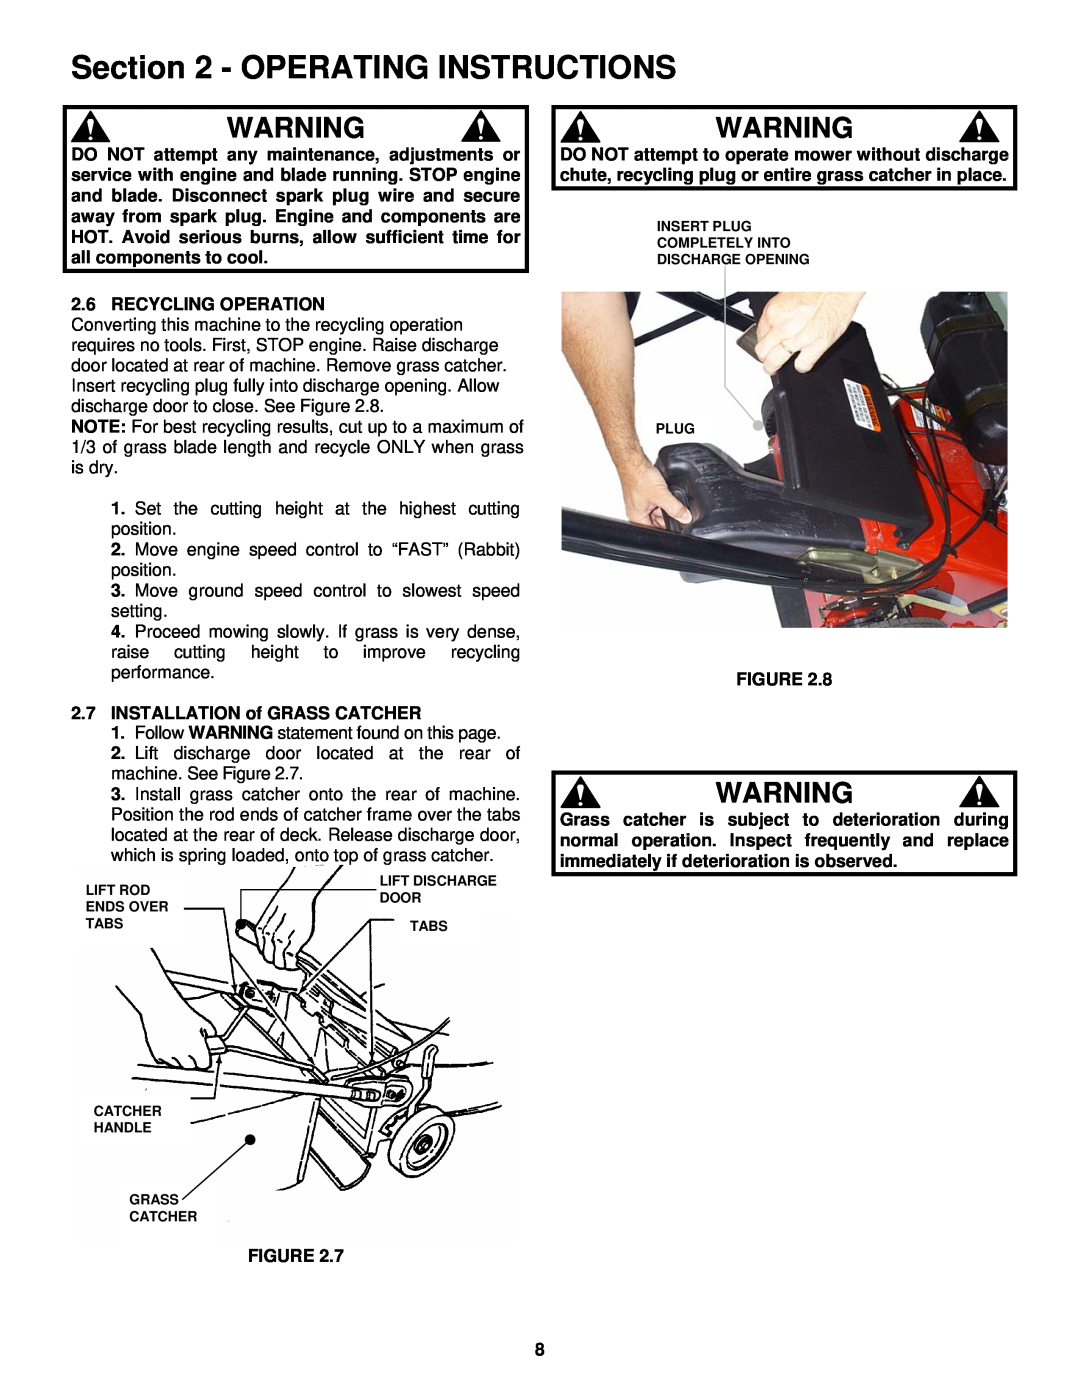 Snapper ECLP21 551HV Operating Instructions, Set the cutting height at the highest cutting position 